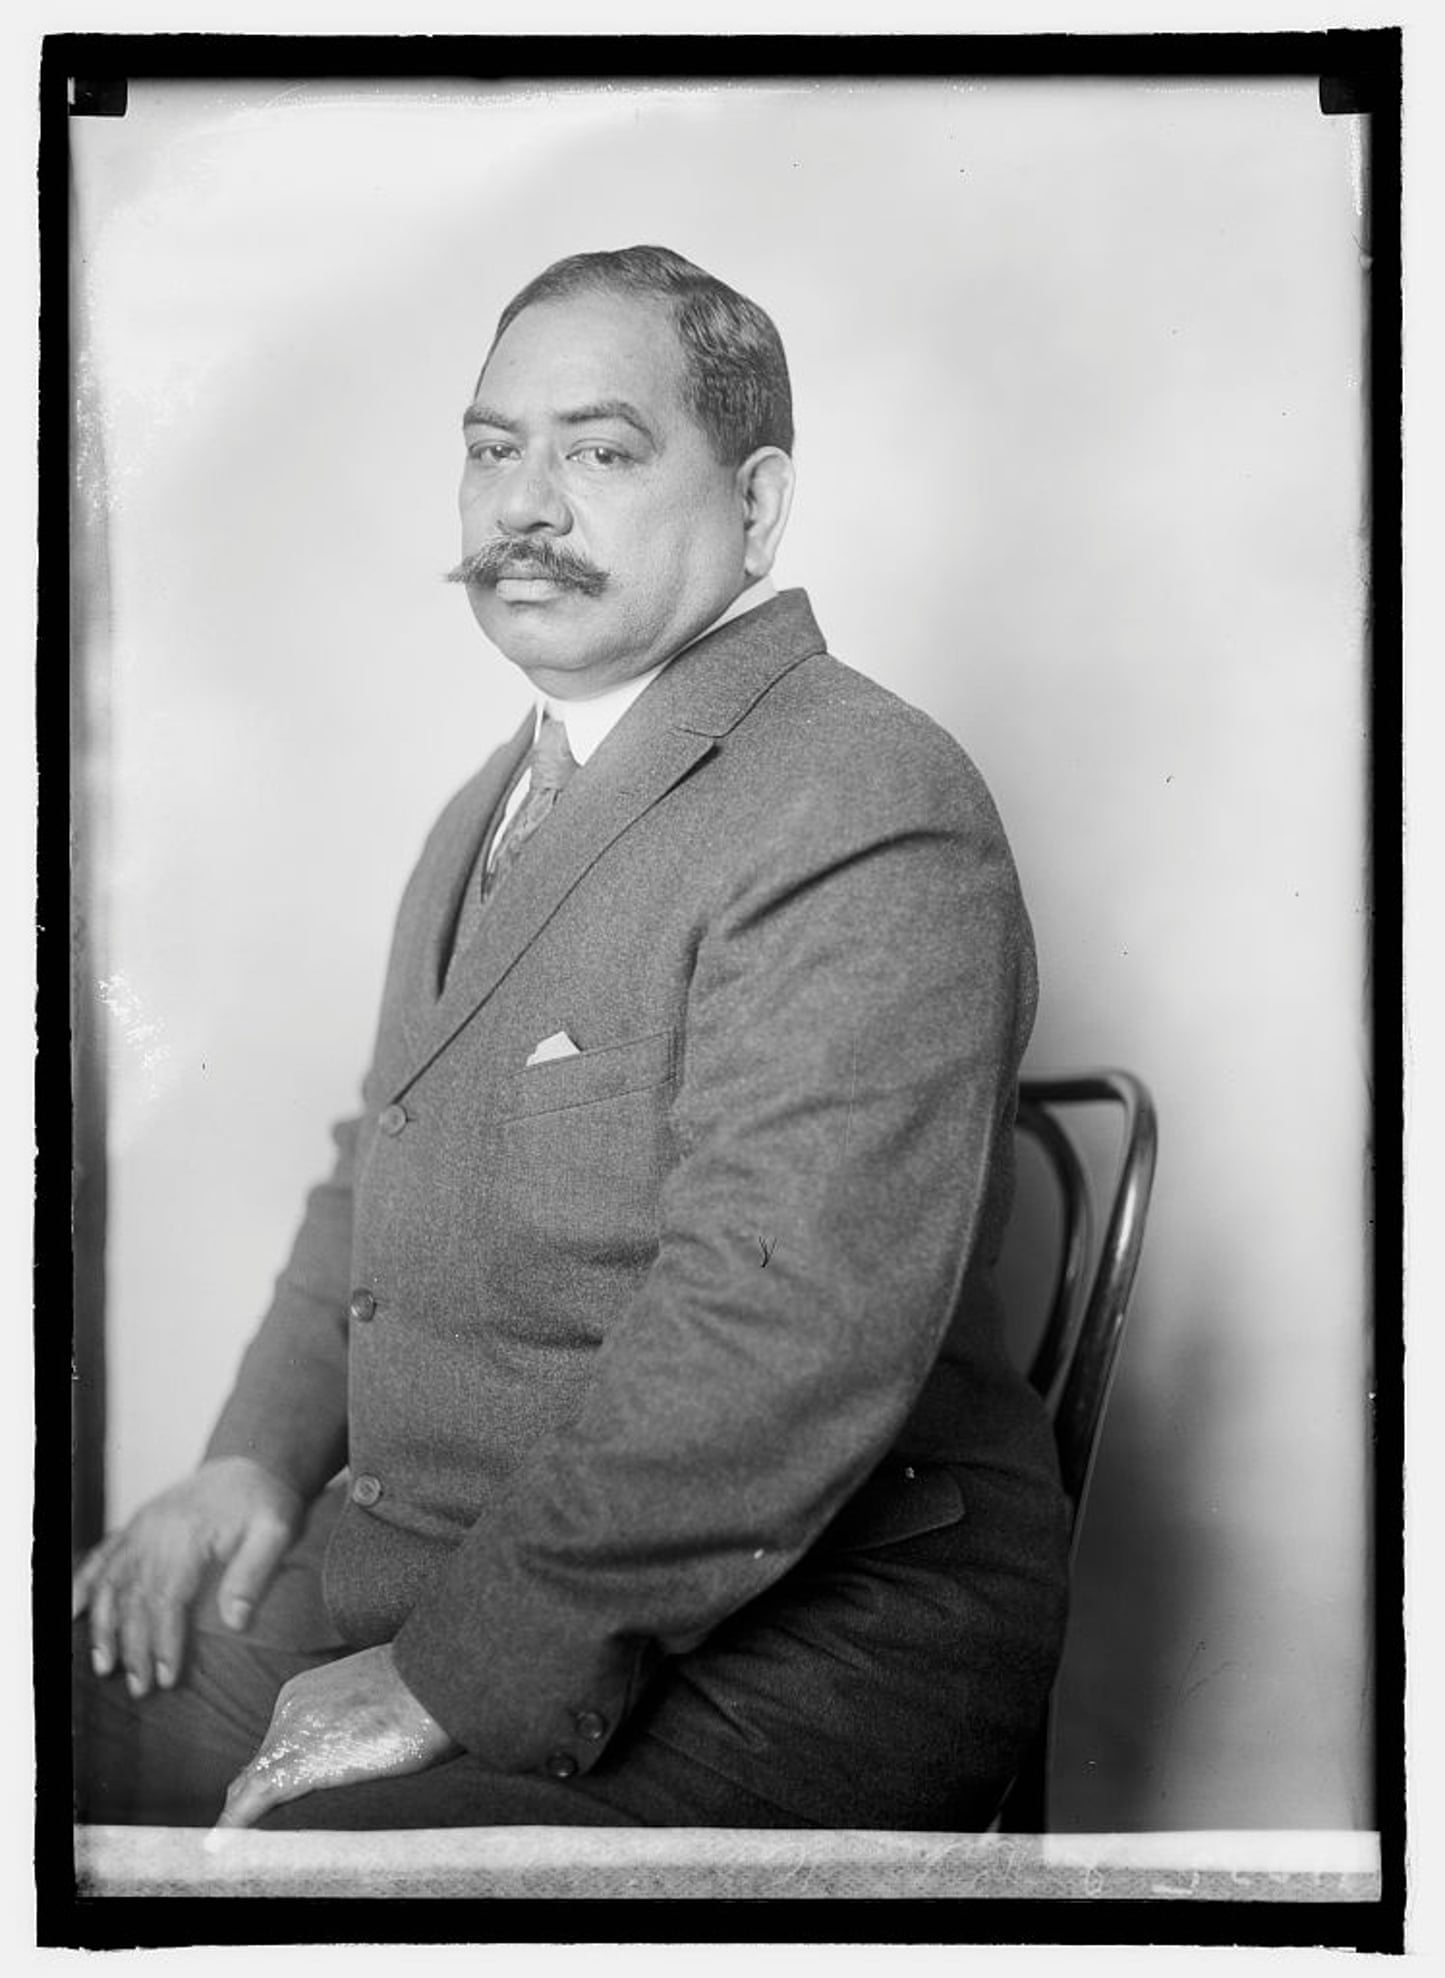 Black-and-white photo of a Native Hawaiian man with short dark hair, a twirly tipped moustache, and a suit, sitting in a cane-backed wooden chair.